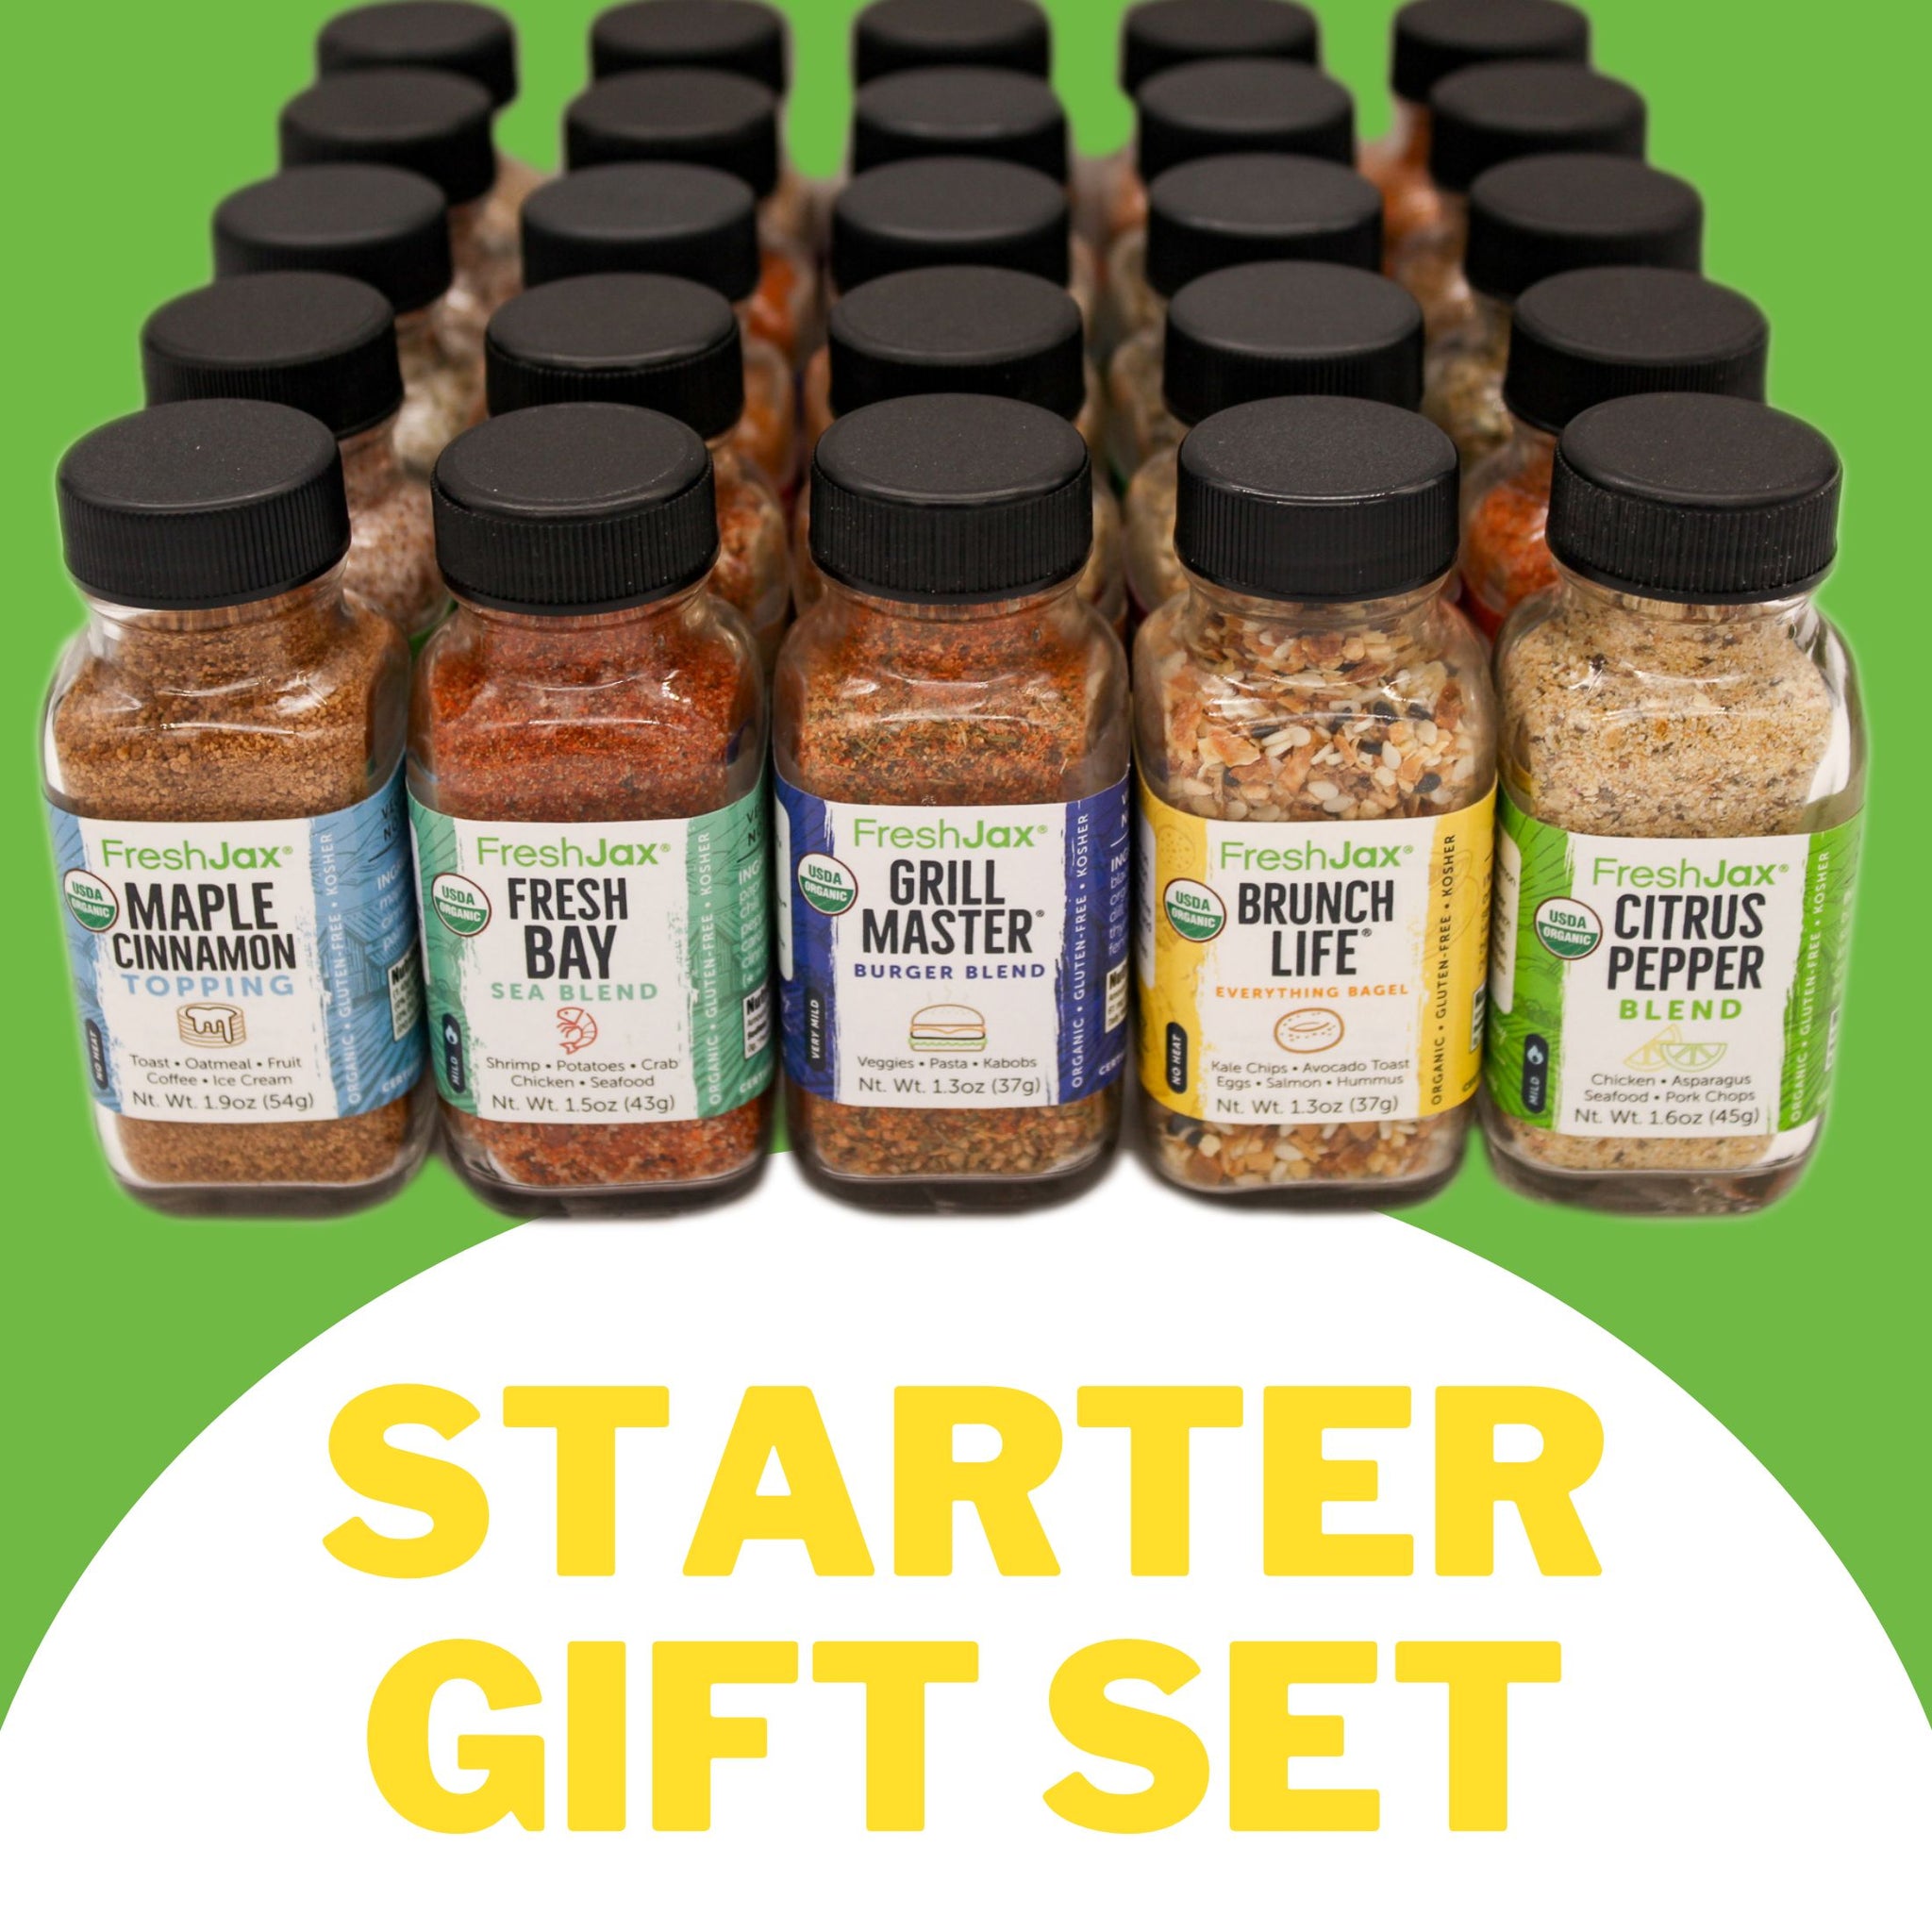 Organic Spice Gift Sets - Gourmet Spice Collections - Cooking Spice Sets